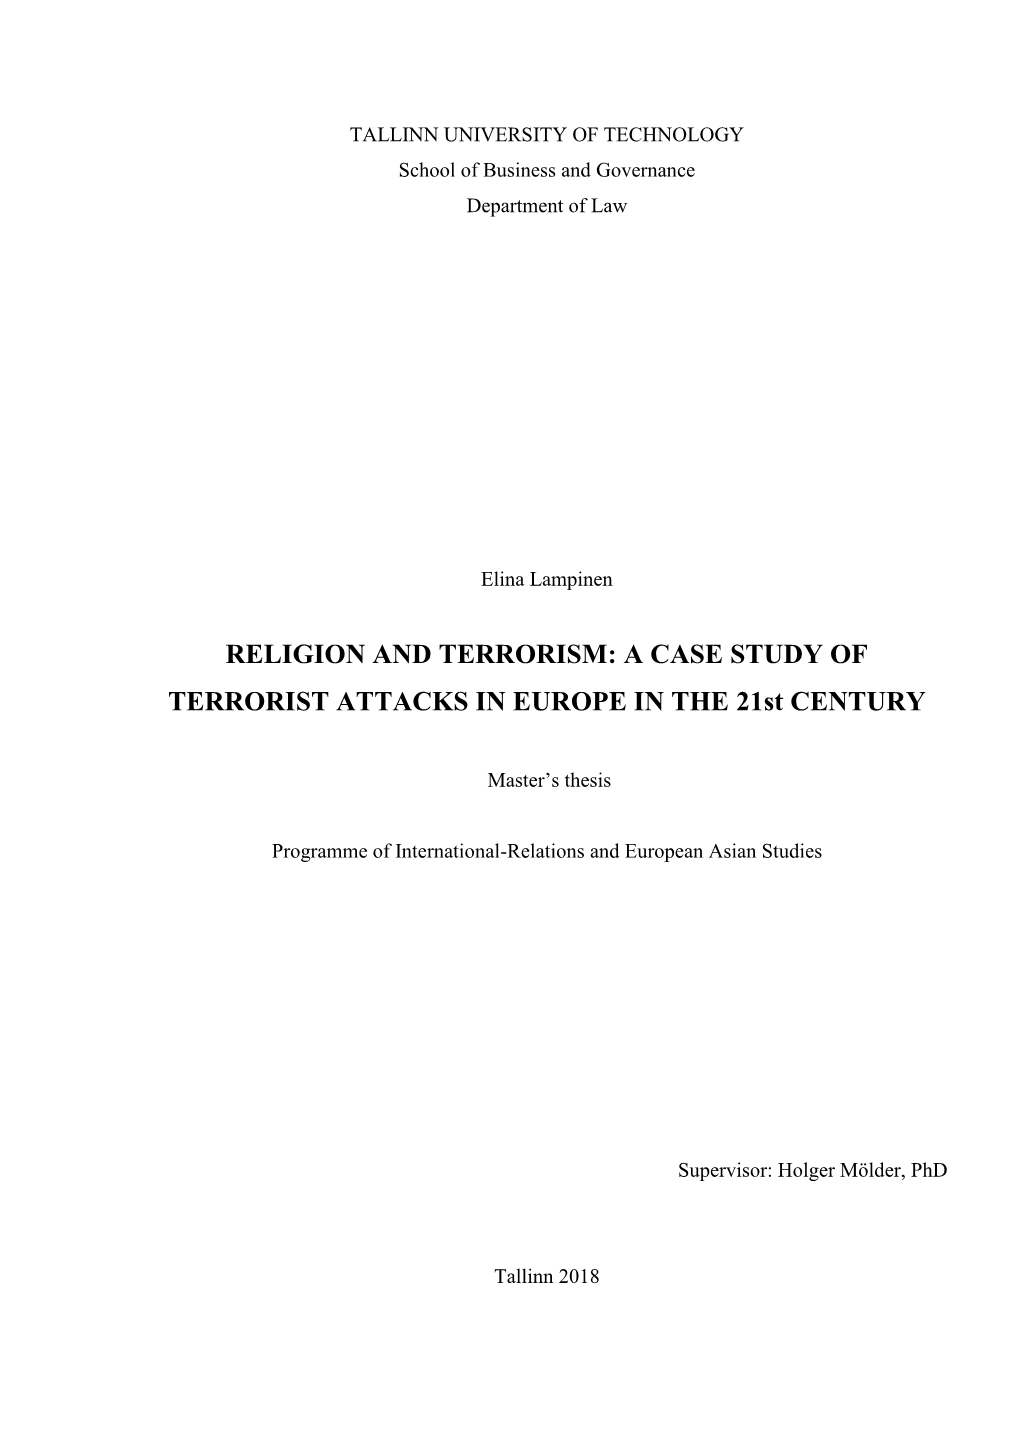 RELIGION and TERRORISM: a CASE STUDY of TERRORIST ATTACKS in EUROPE in the 21St CENTURY